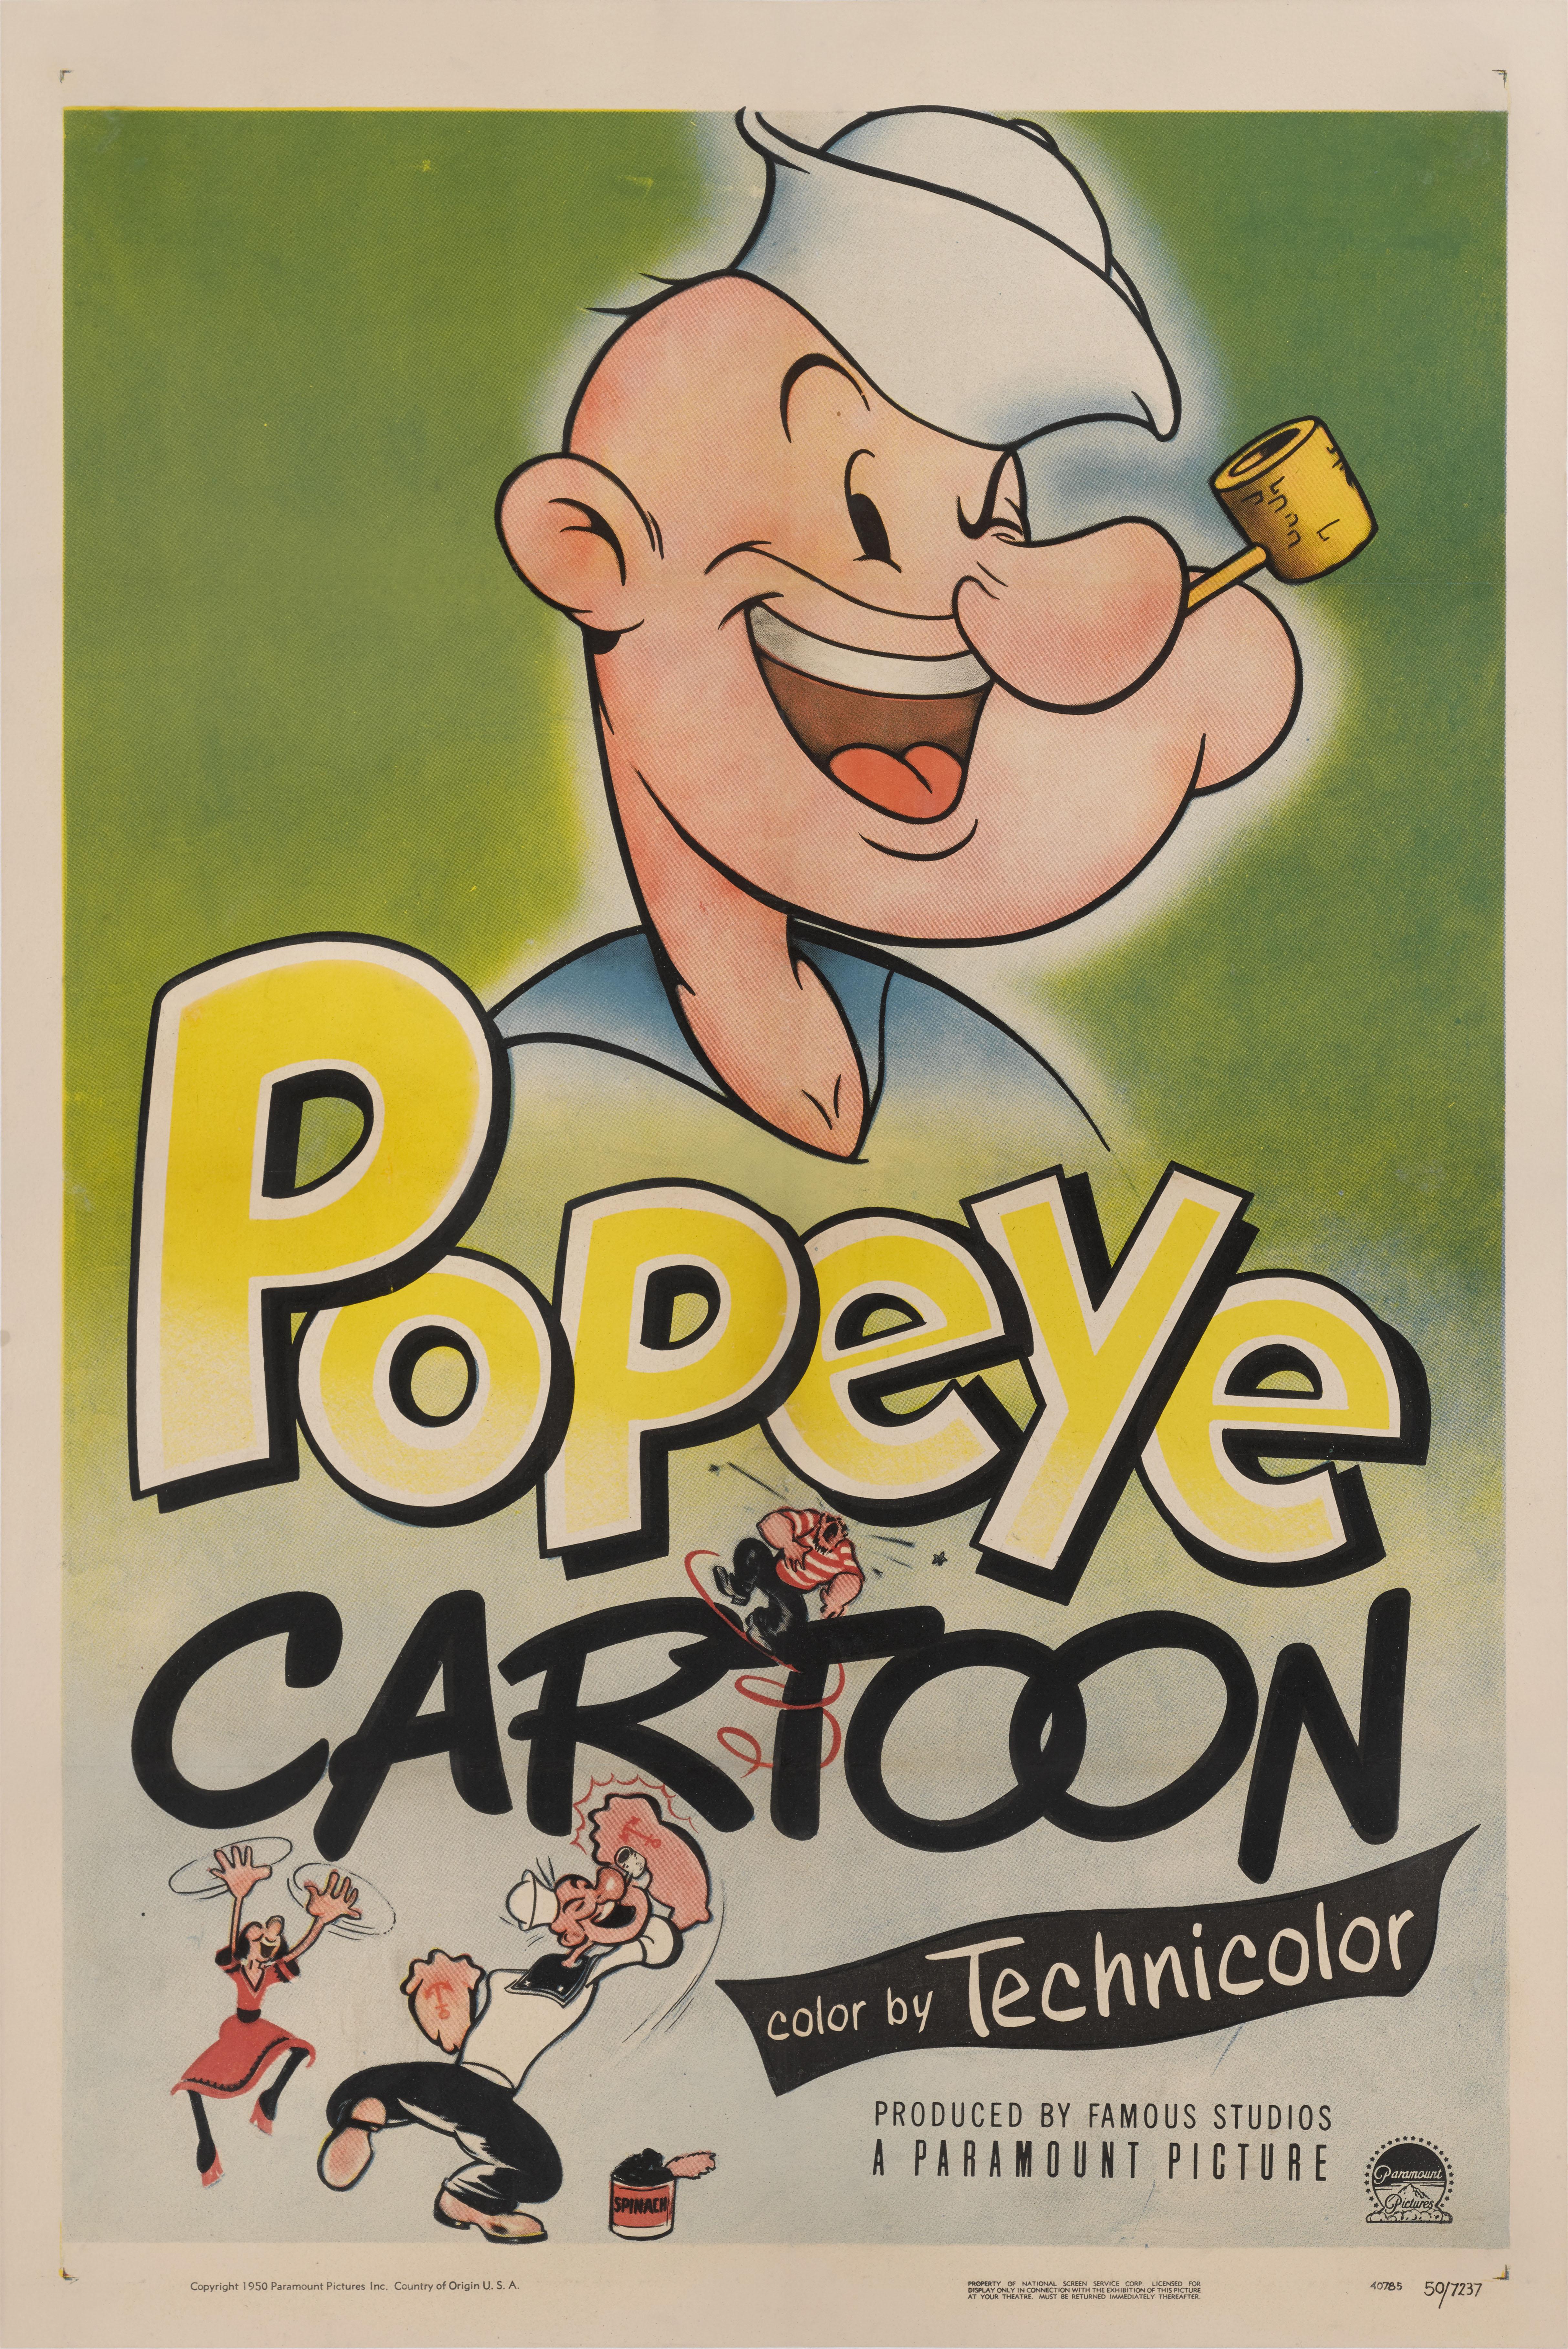 Original American film poster for Popeye 1950.
This is what's known as a stock poster as instead of creating different posters the studio created one piece of artwork for a season of Popeye films.
This poster is conservation linen backed and it